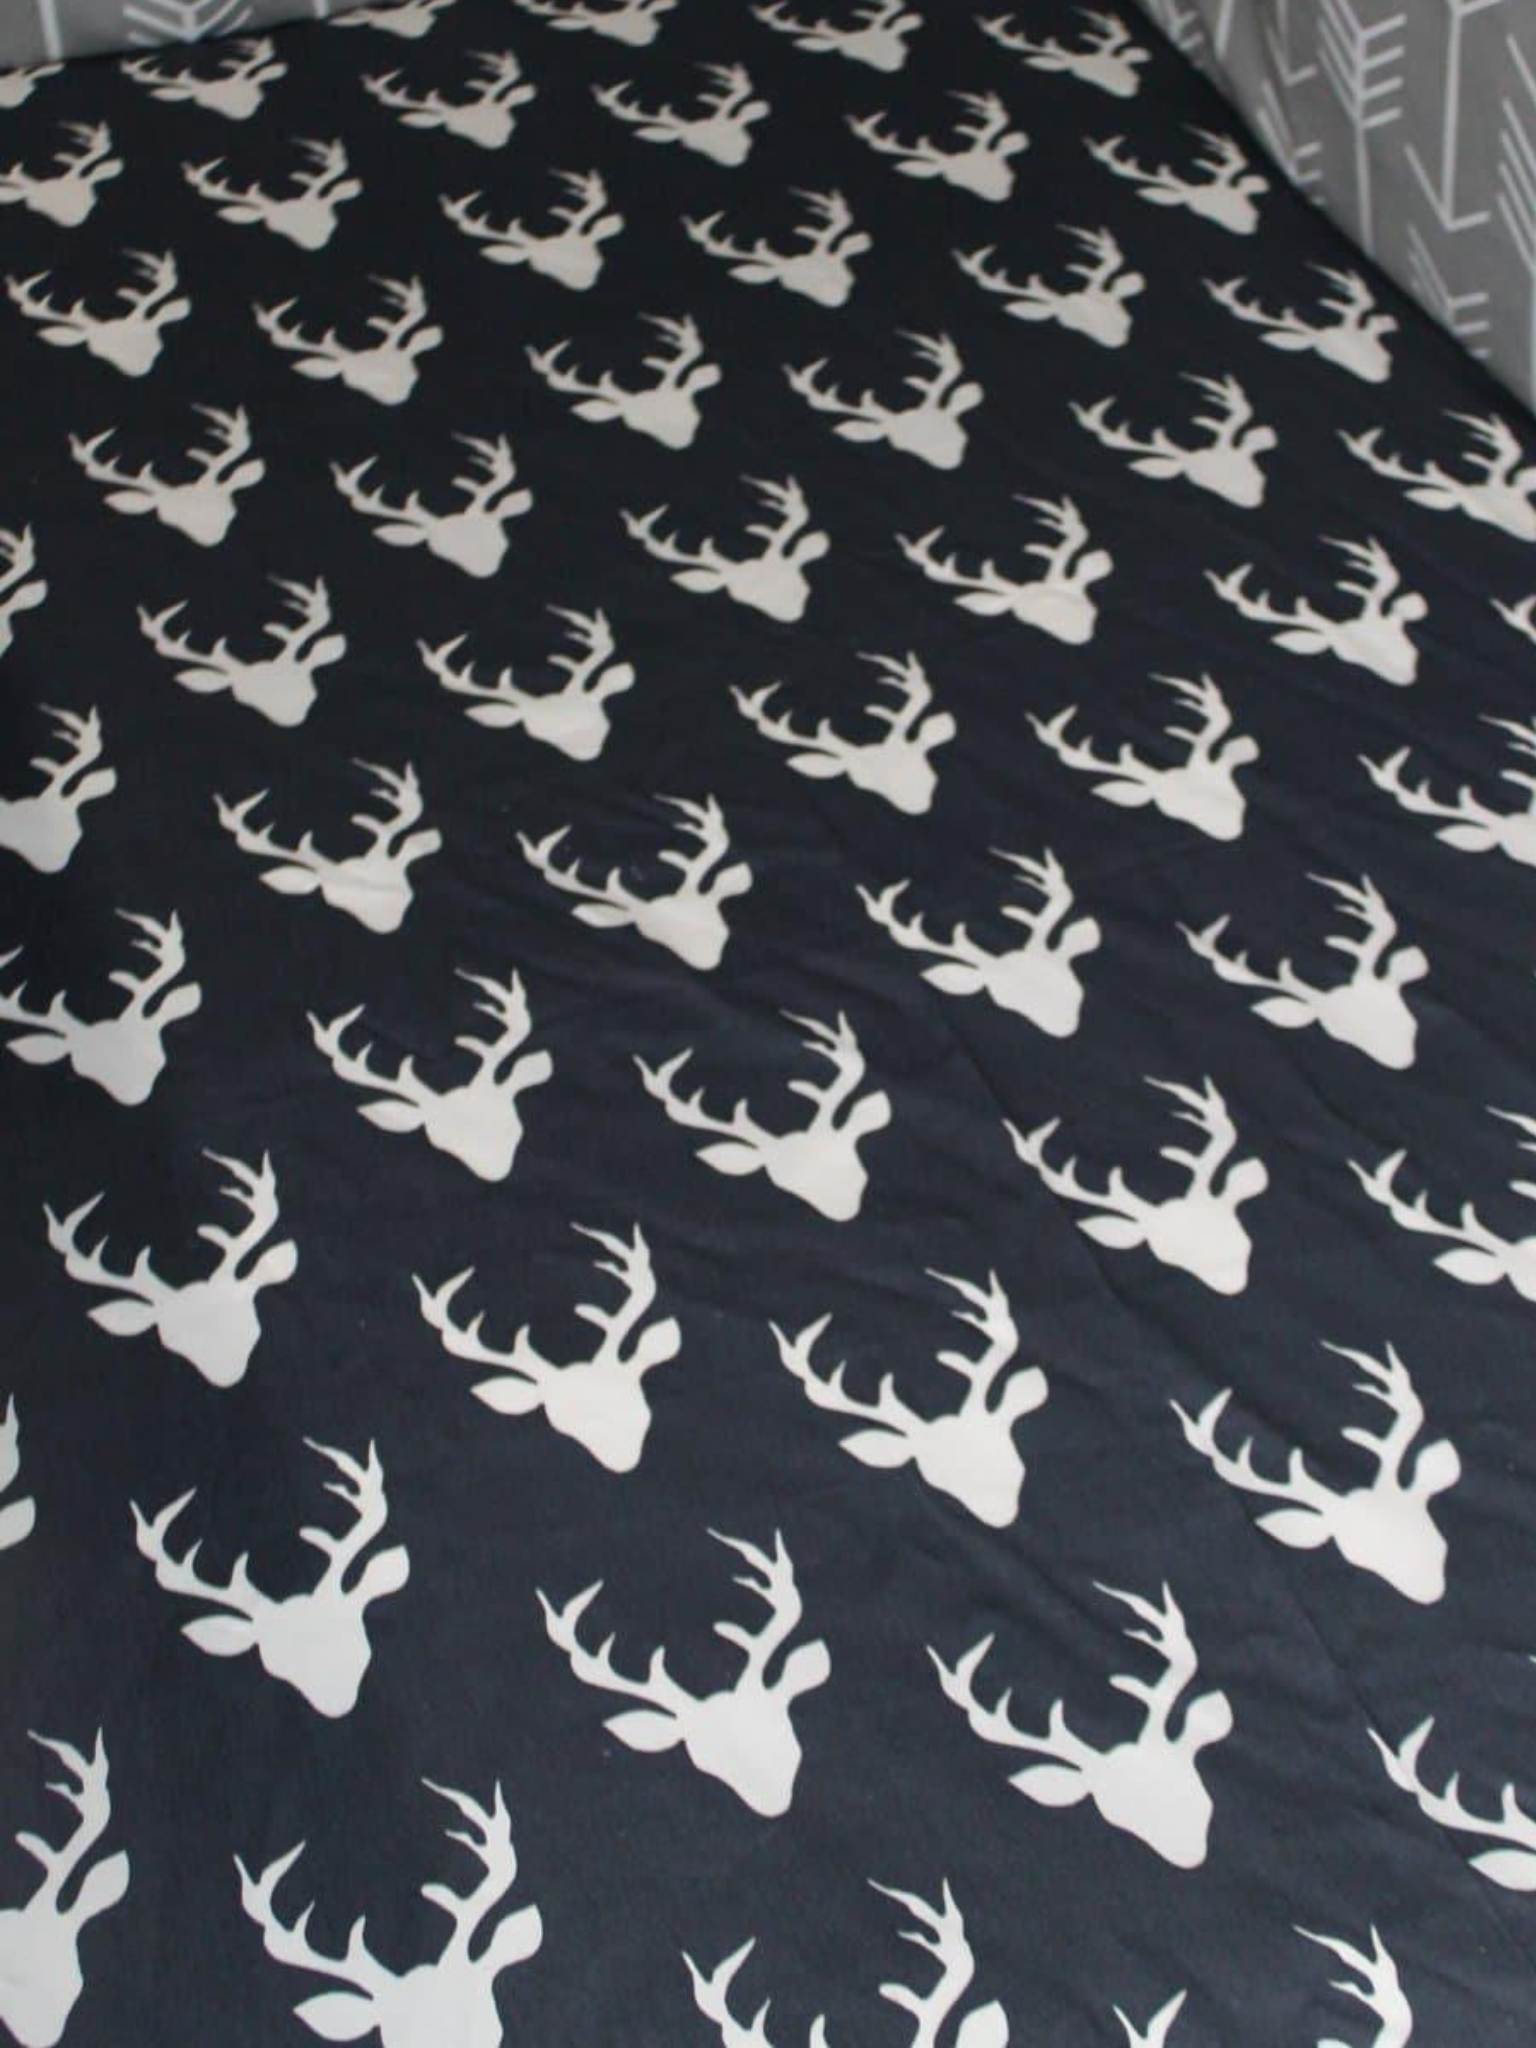 Fitted Sheet - Navy Buck Woodland Sheet : All Bed Sizes - DBC Baby Bedding Co 